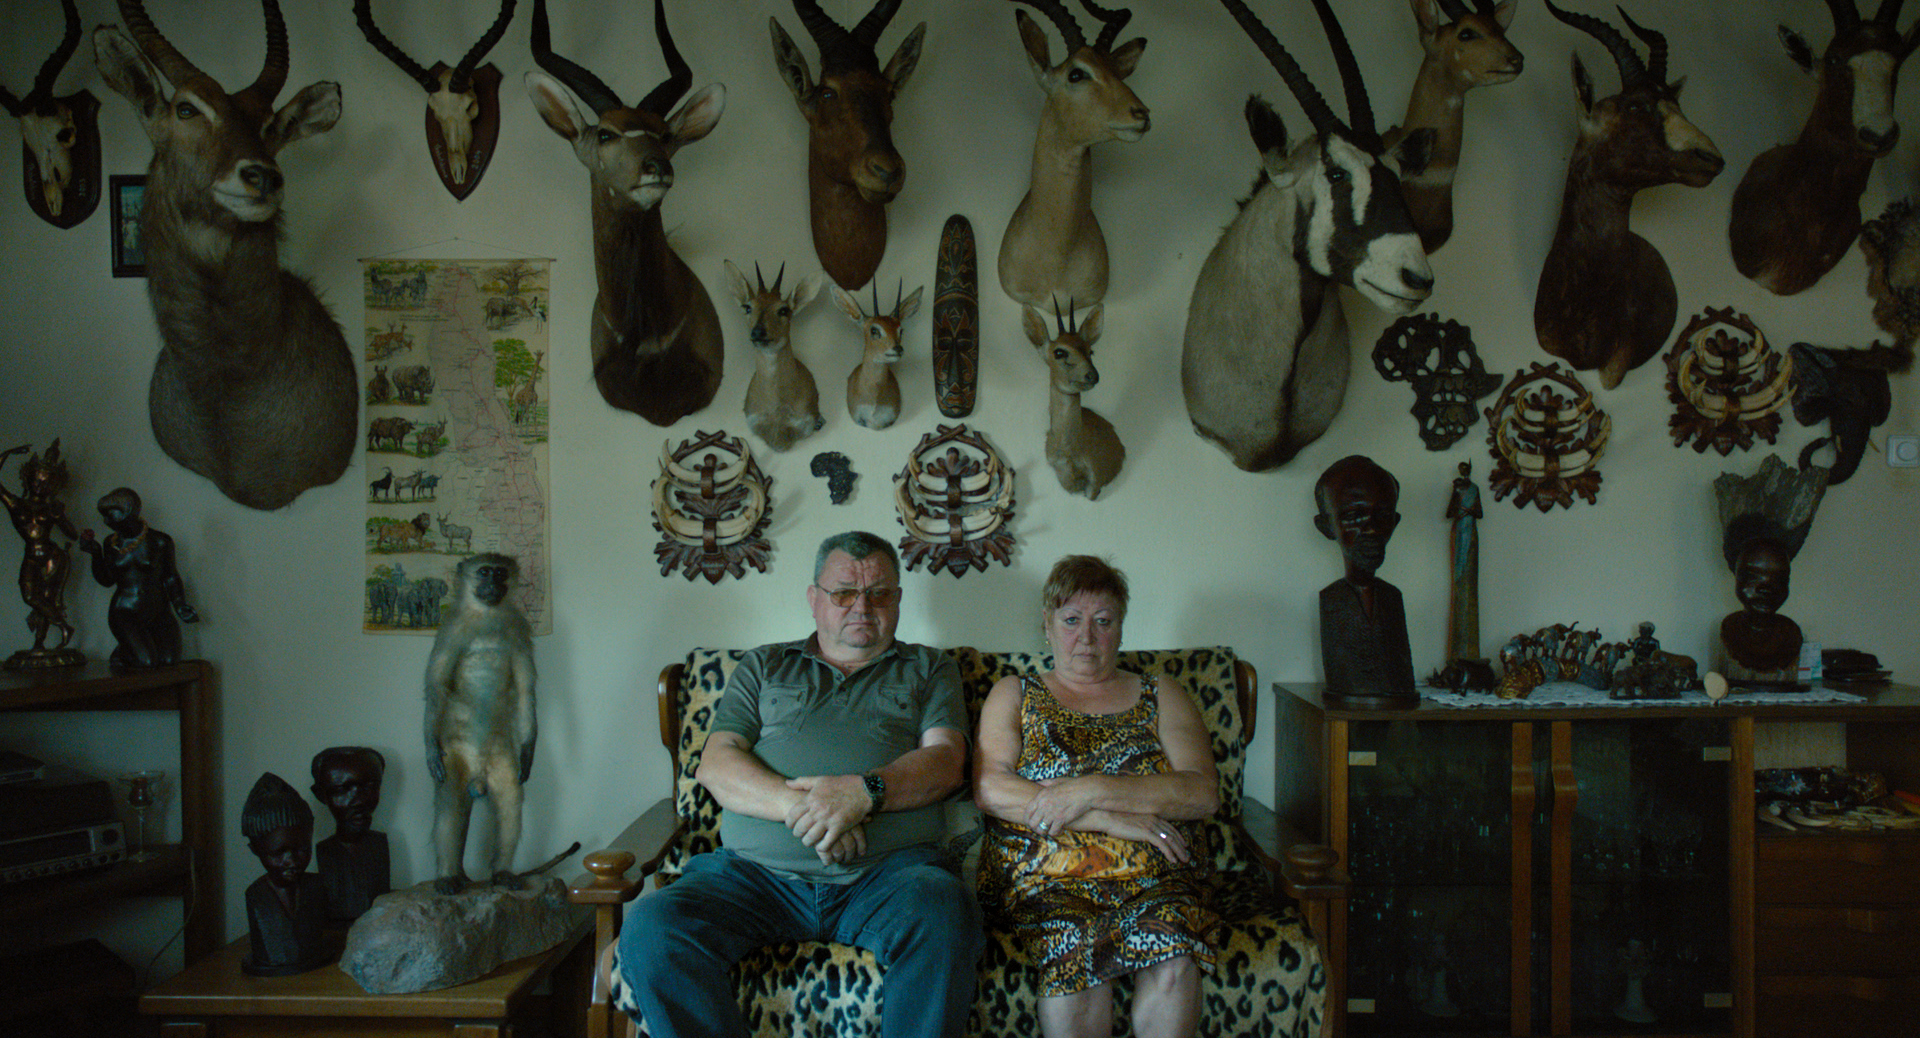 Venice Review: Ulrich Seidl’s Transgressive Hybrid Doc About What People Do ‘ The Basement’